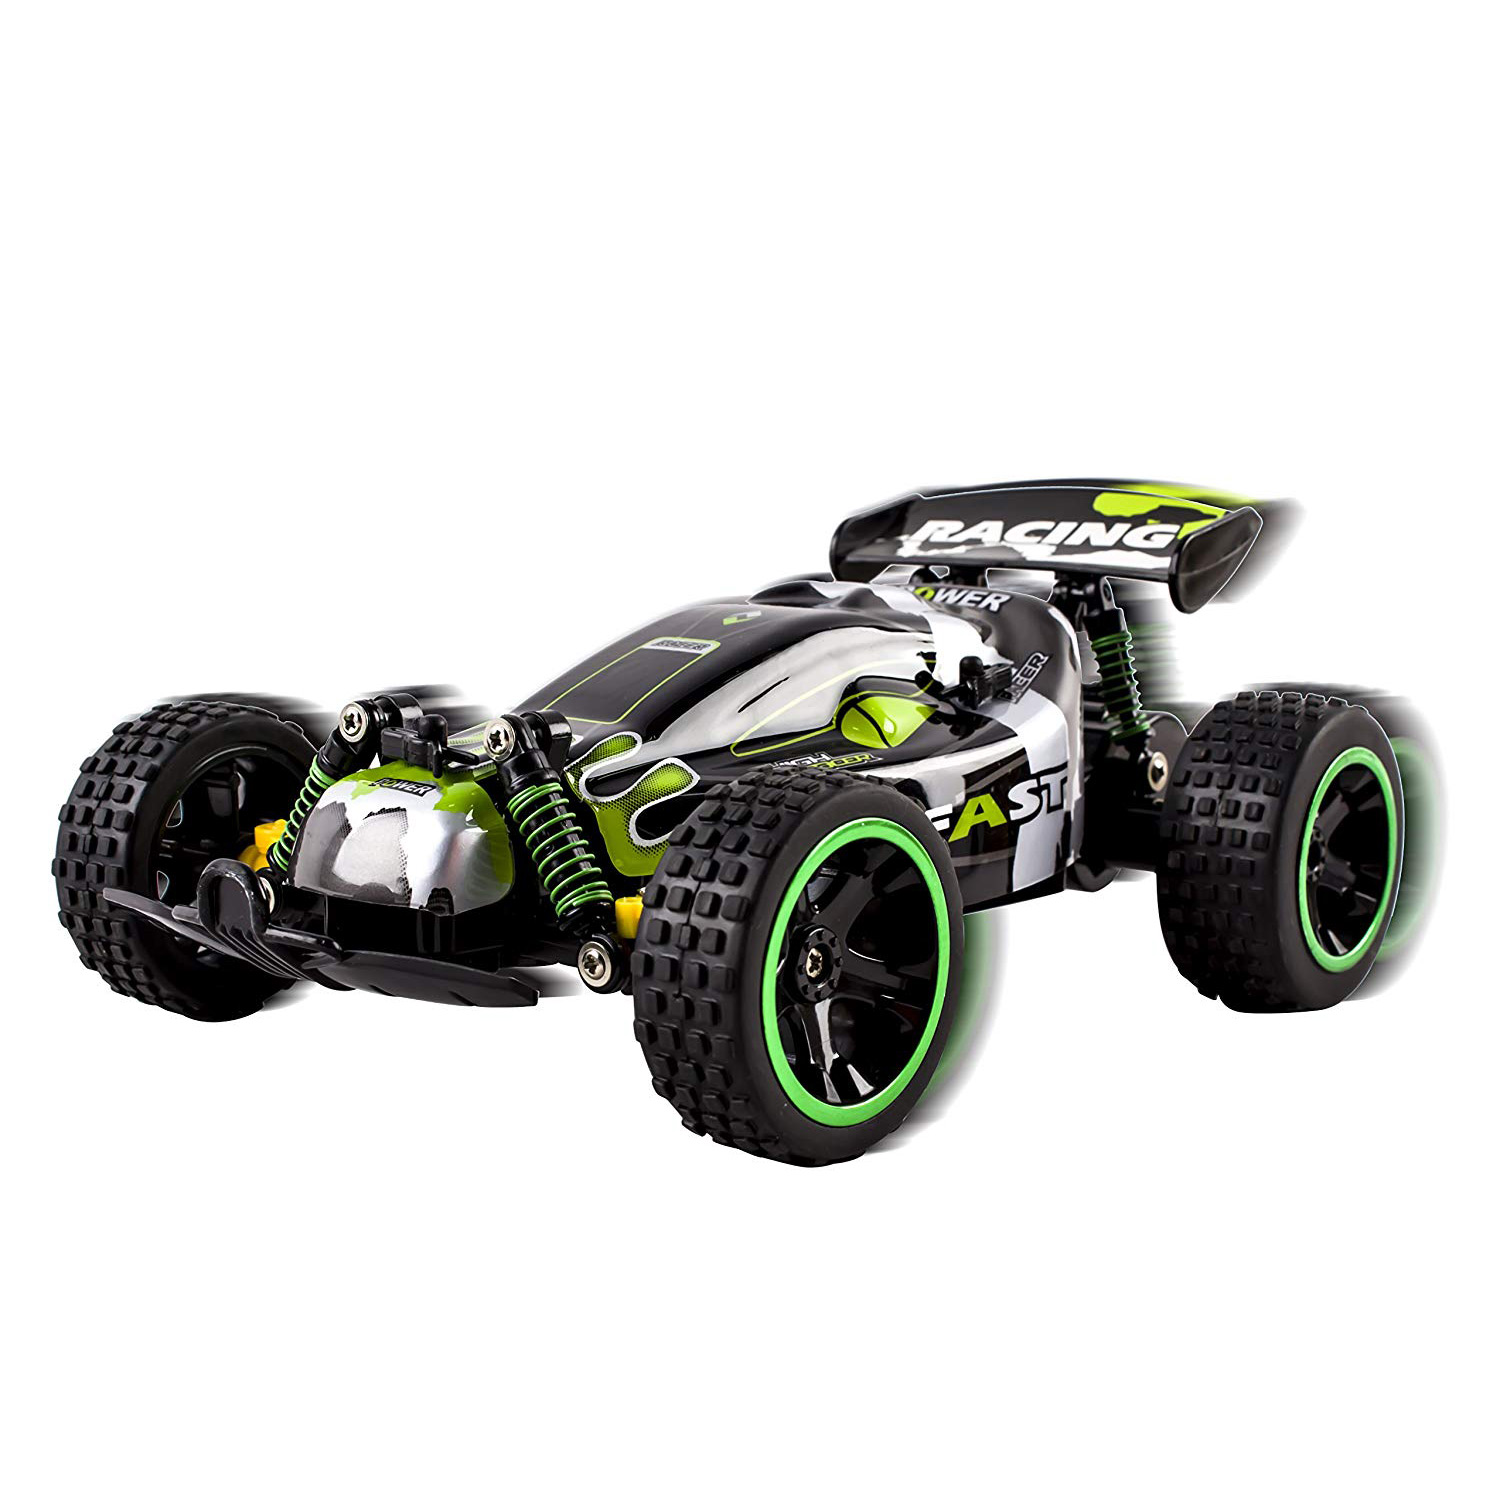 RC Buggy Truck 2.4Ghz System 1:18 Scale Remote Control High Speed Power With Working Off-Road Suspension Ready to Run Indoor And Outdoor Radio Car Toy Green